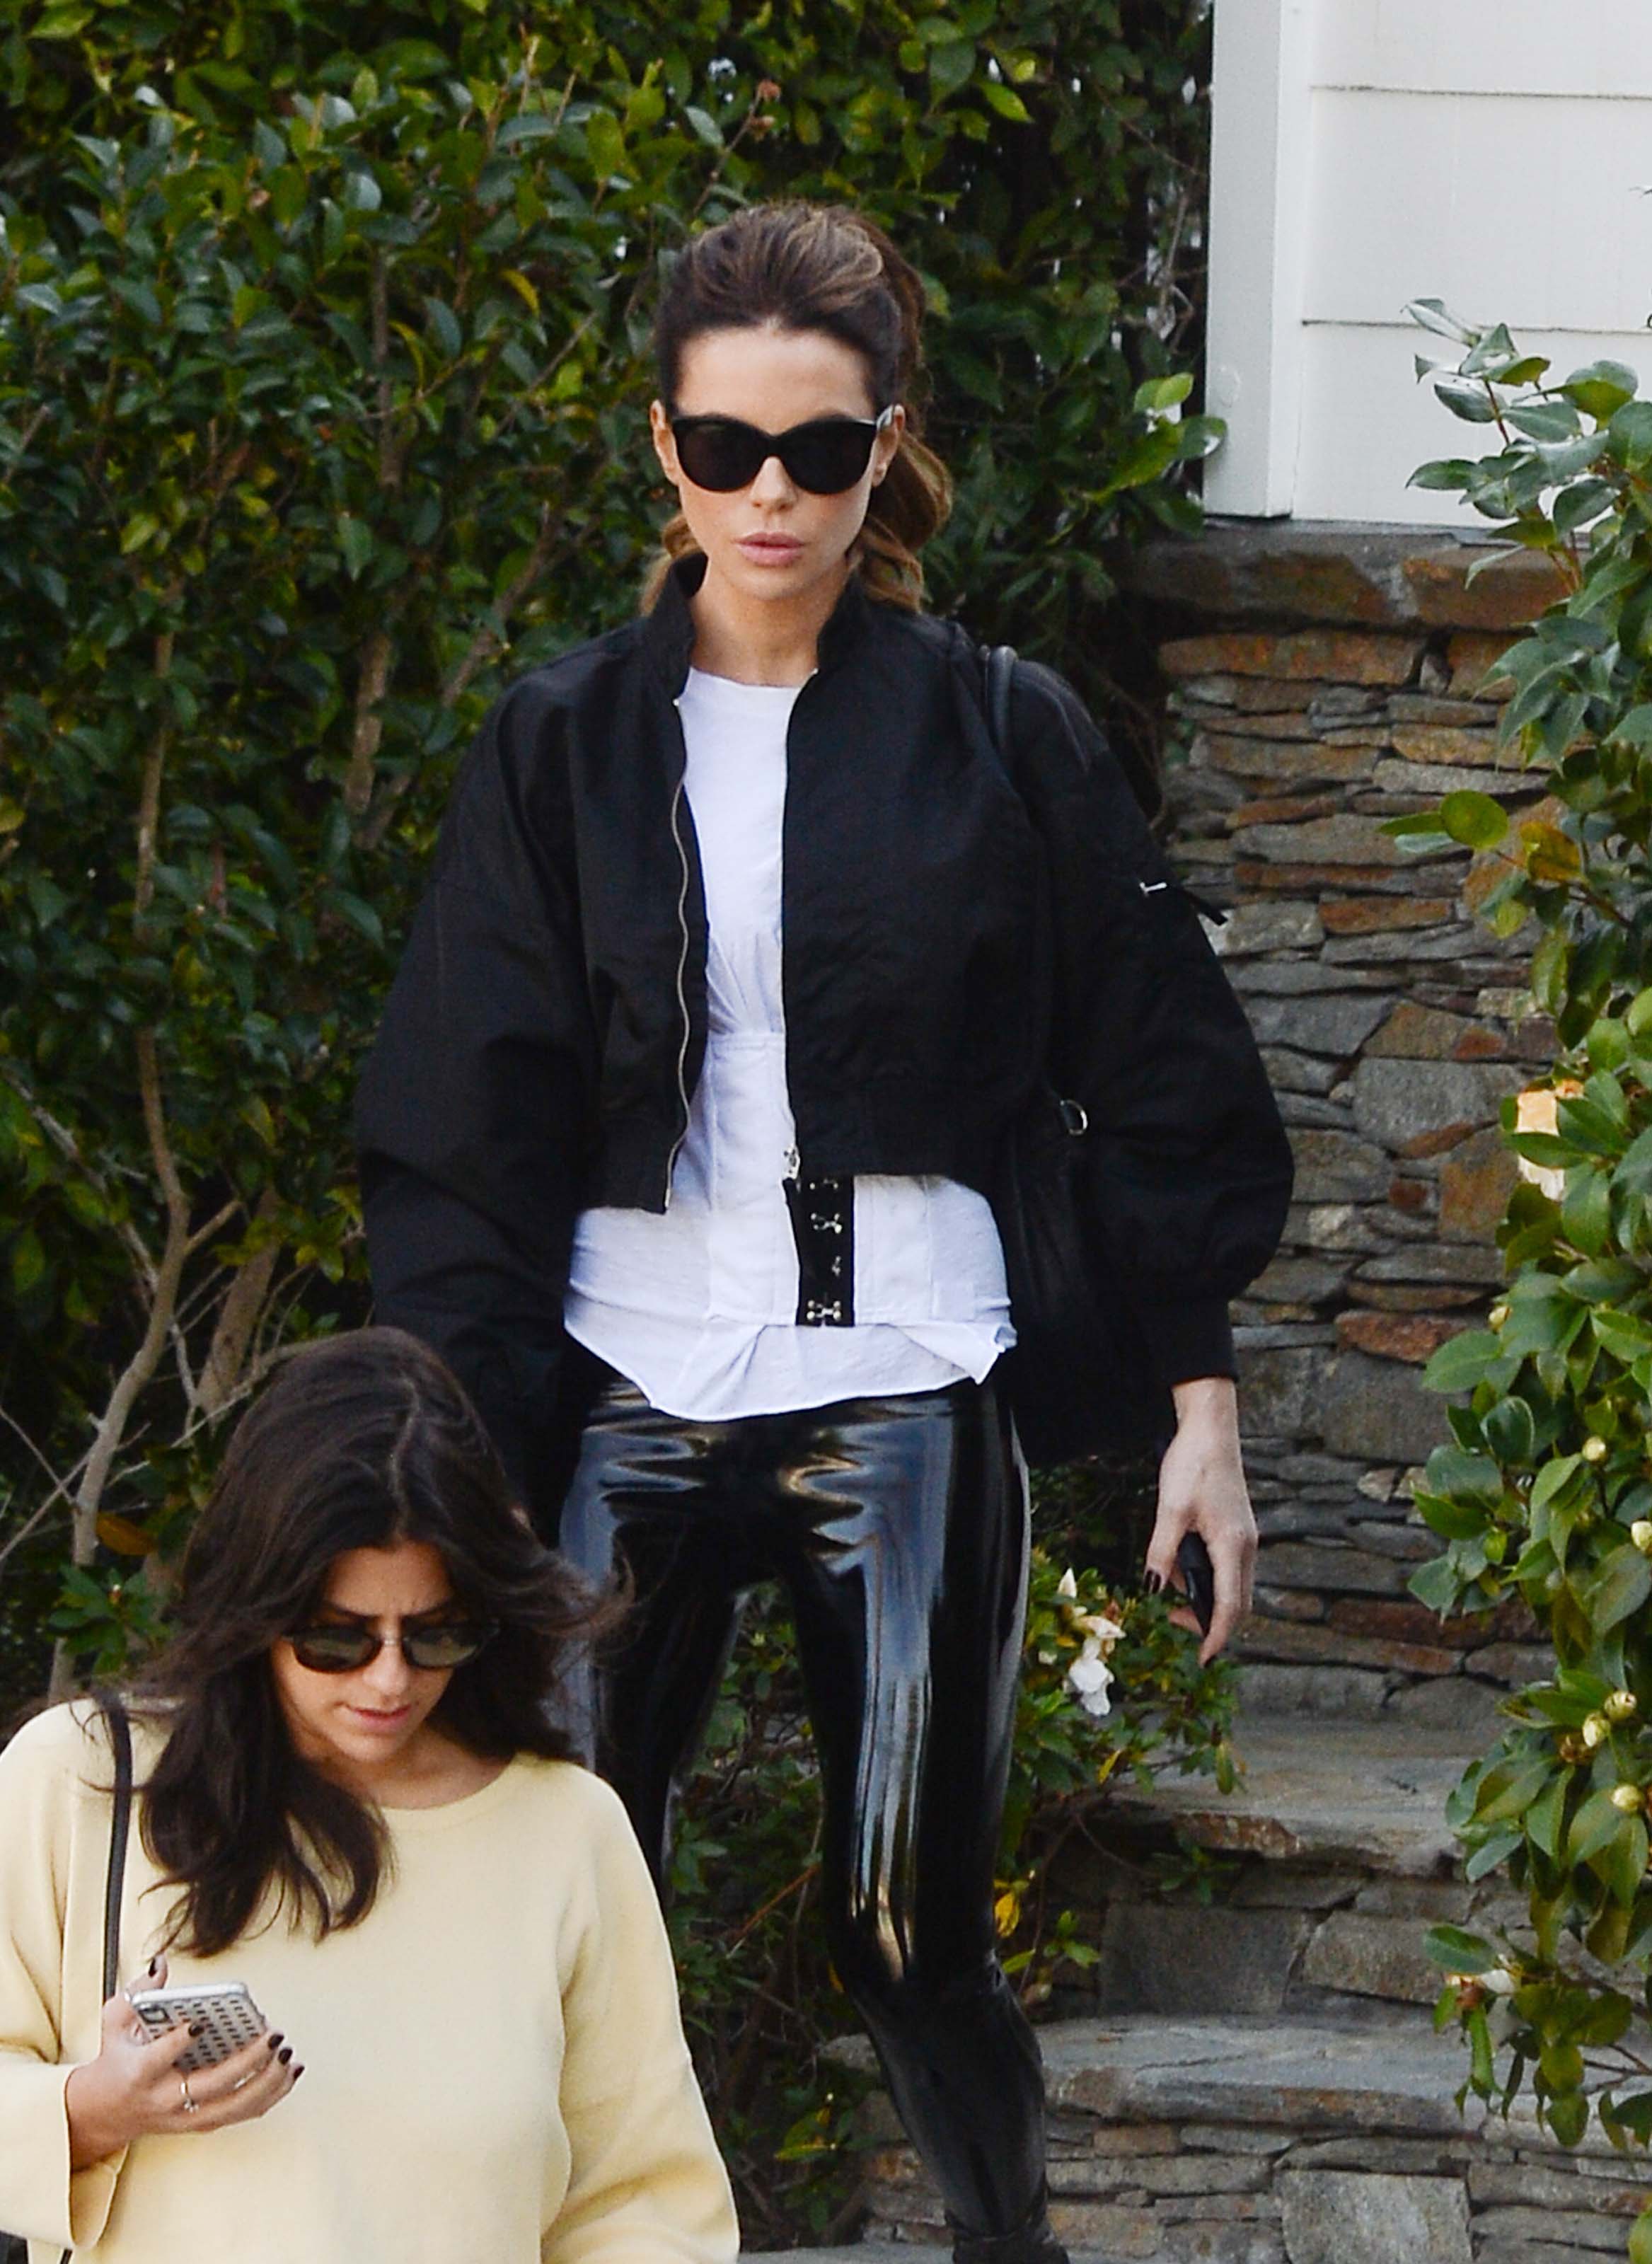 Kate Beckinsale out in LA